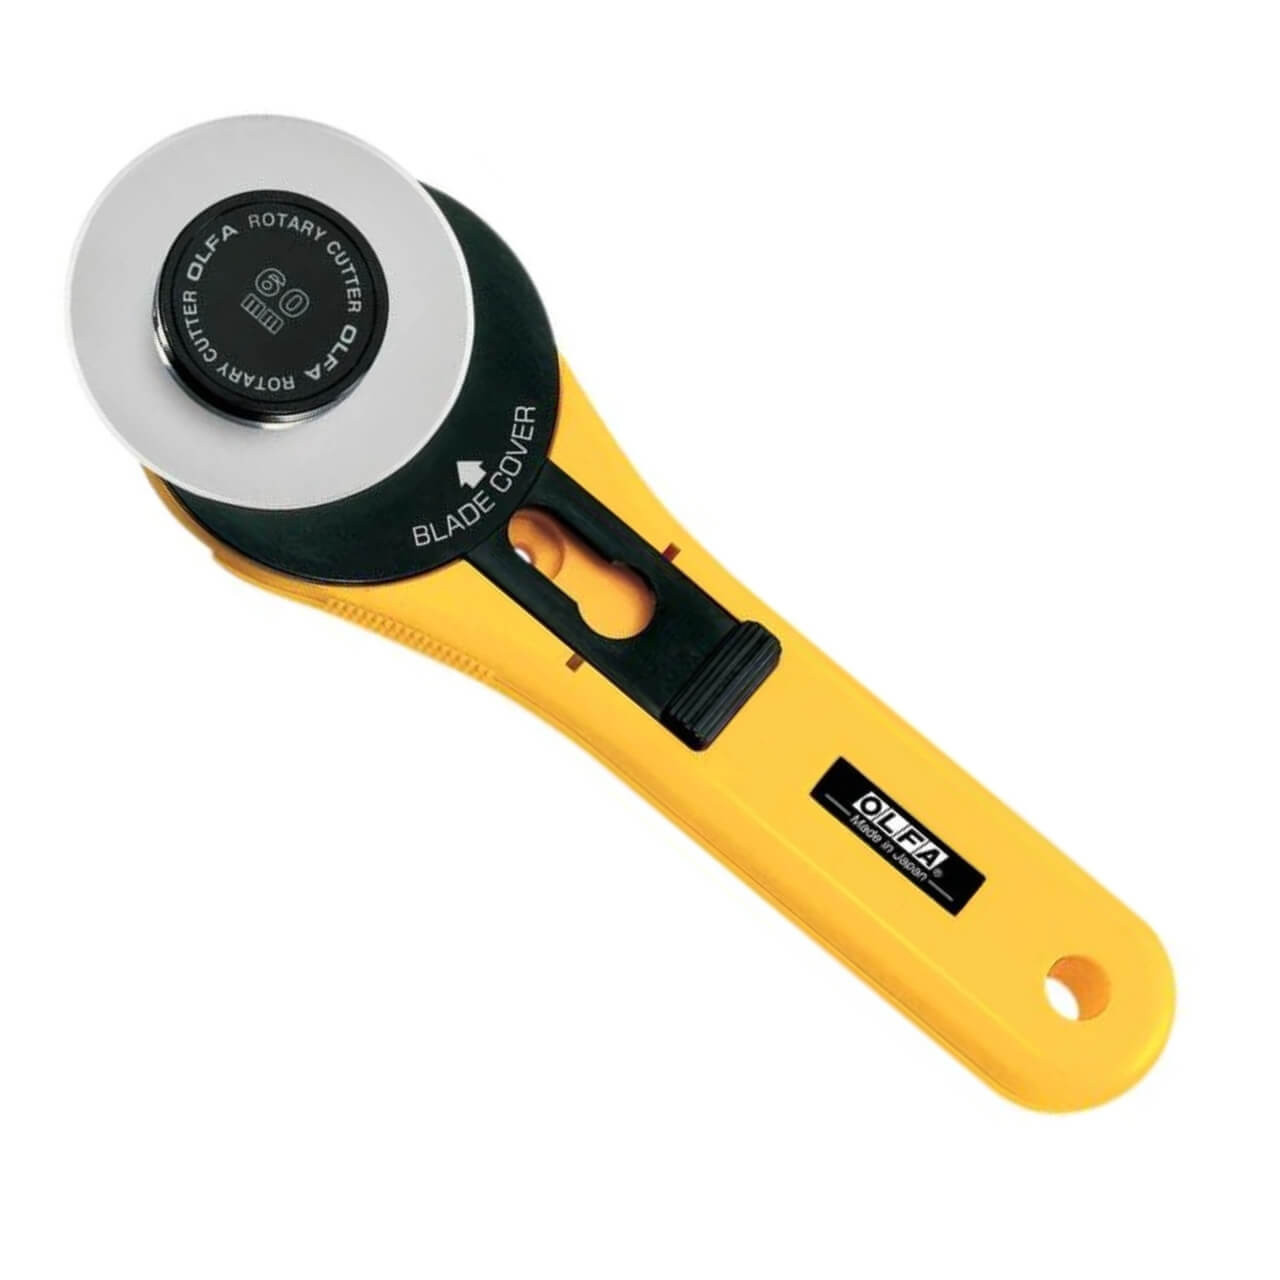 View of the OLFA Straight Handle 60mm Rotary Cutter with safety cover open. Yyellow body and durable tungsten steel blade, ideal for versatile crafting needs.